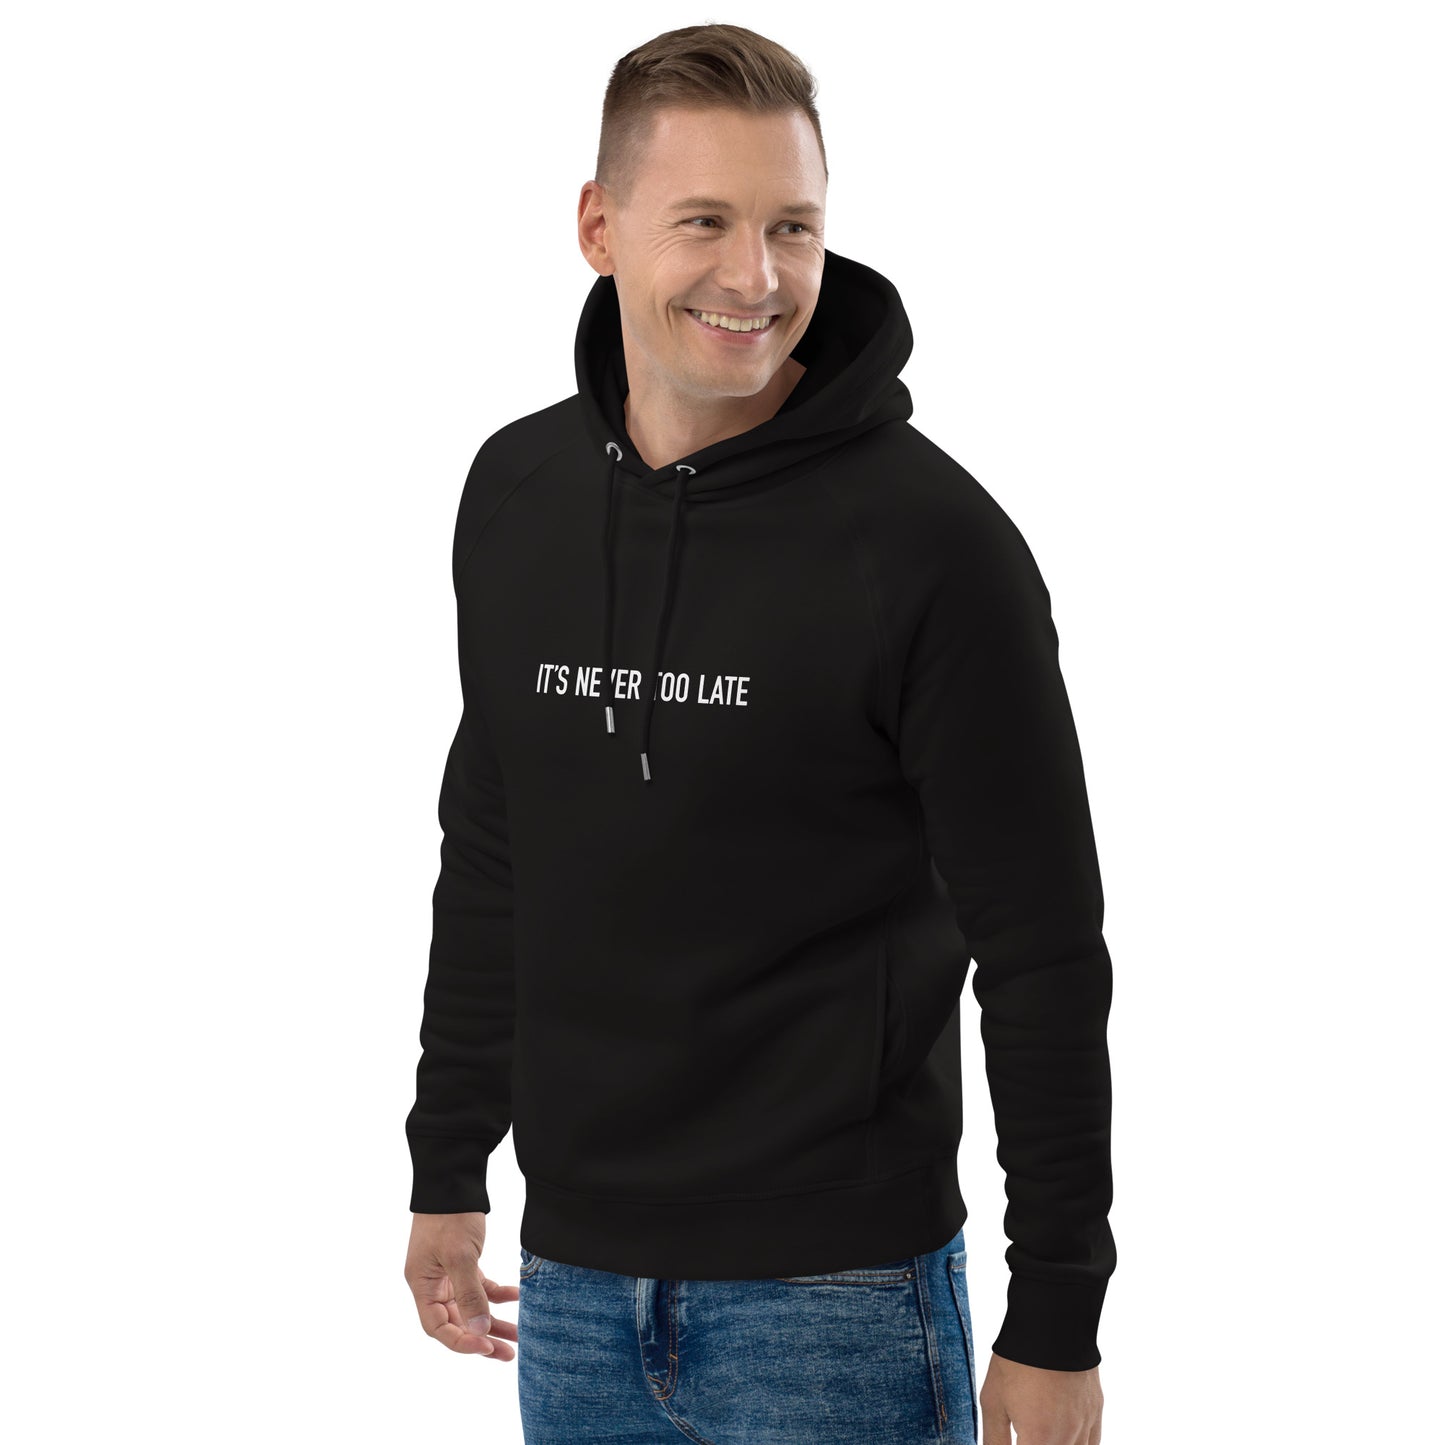 It's Never Too Late Men's Organic Cotton Hoodie